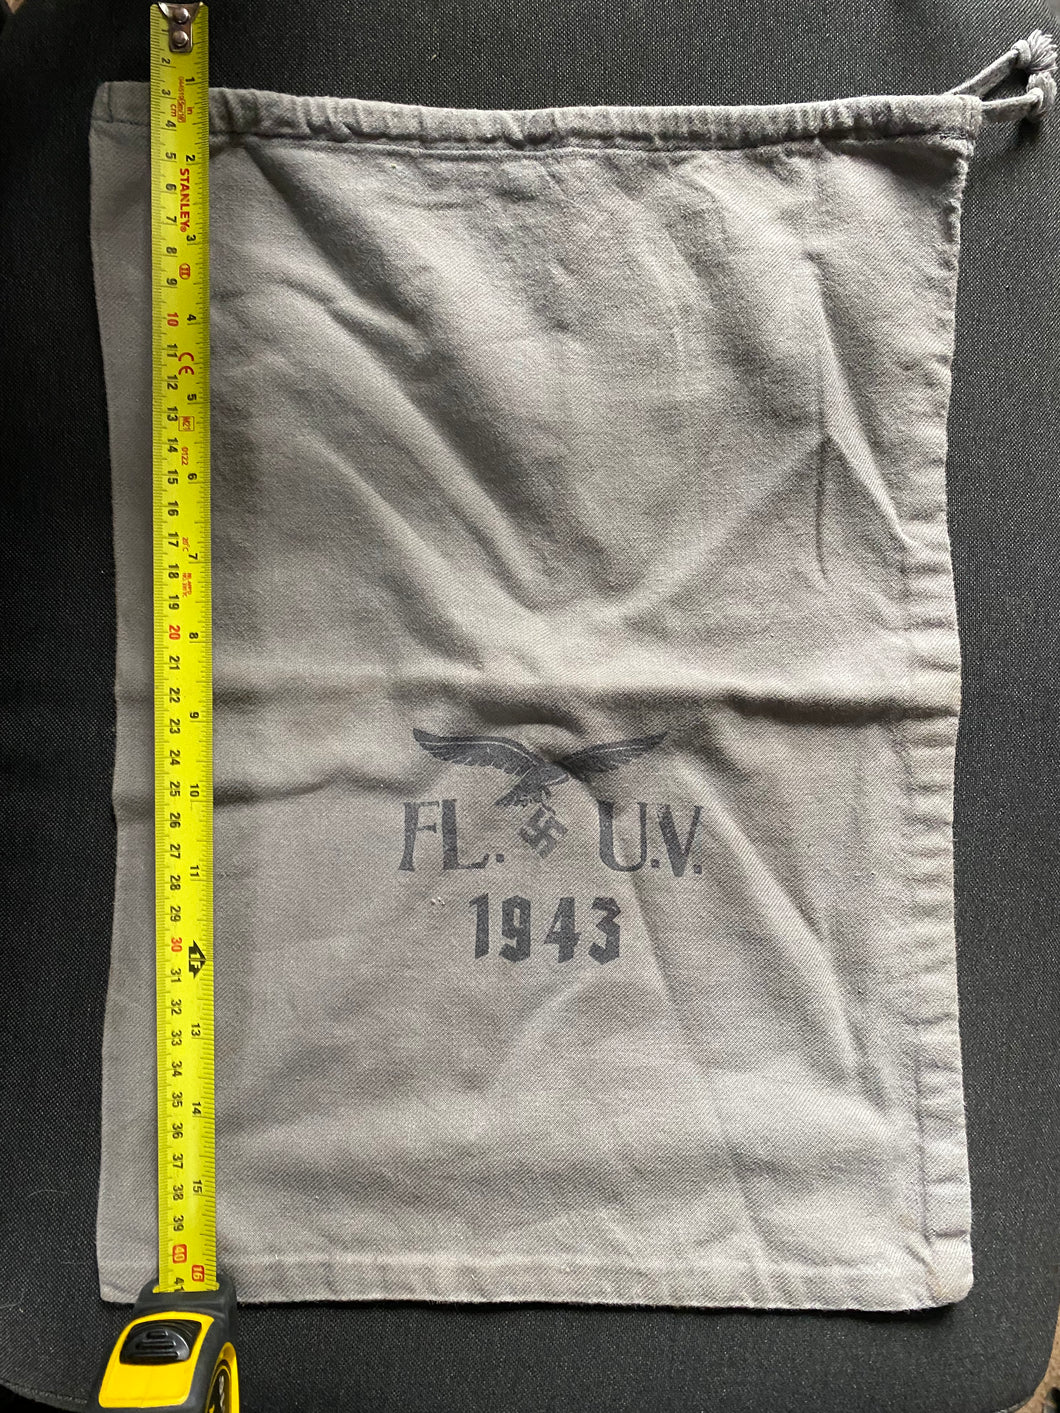 A 1943 Dated Reproduction WW2 German Luftwaffe Mail / Money bag.